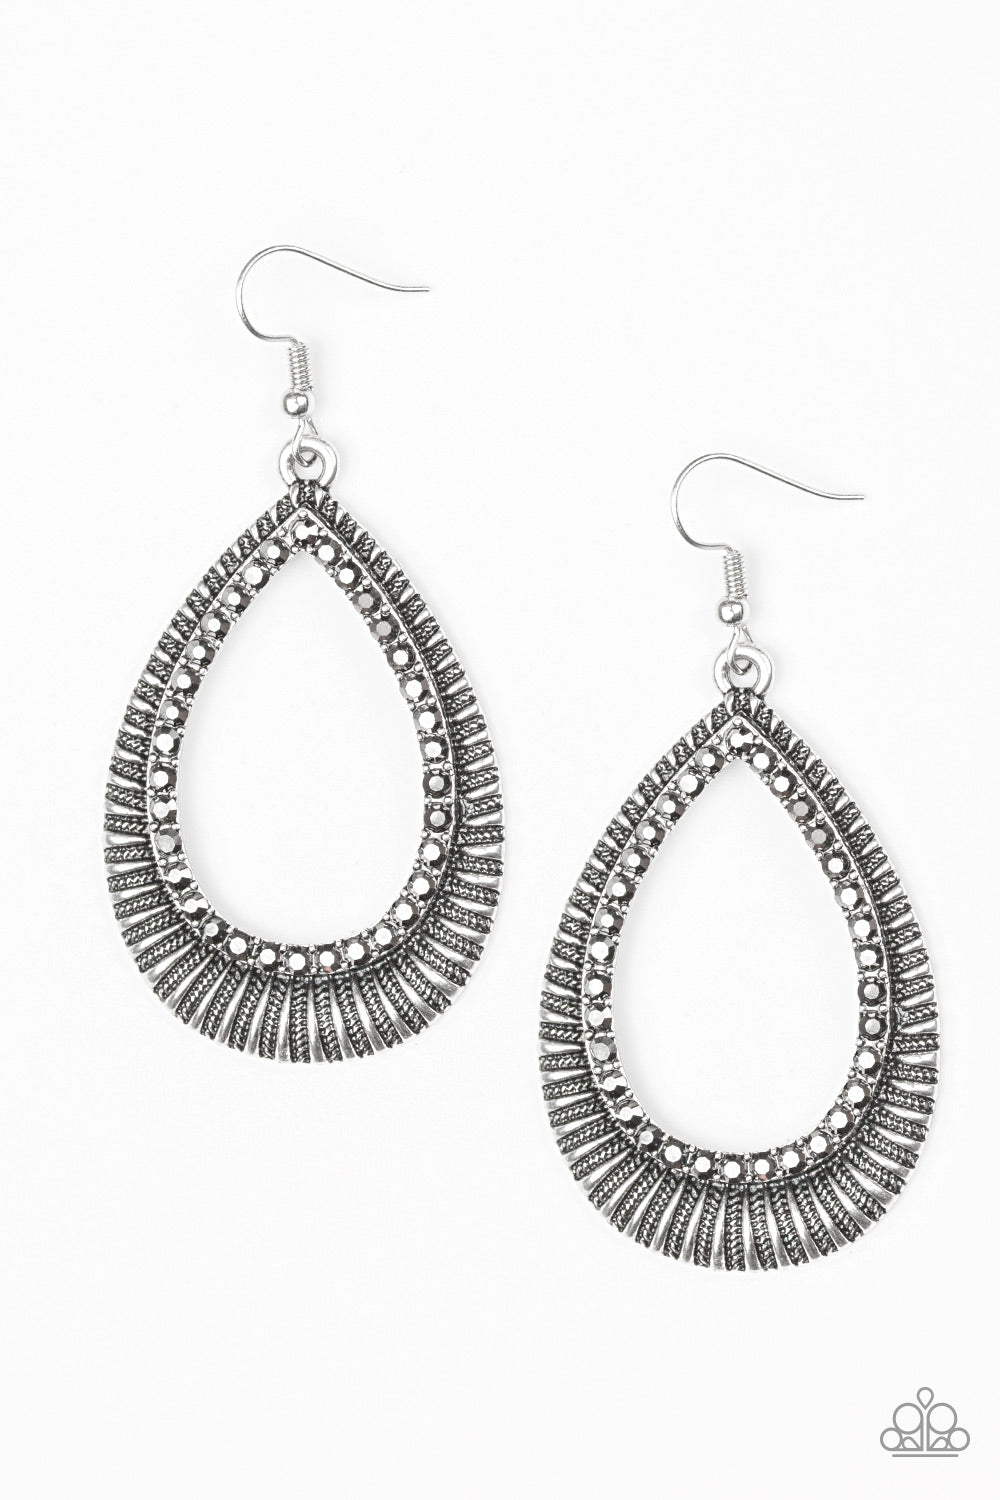 Paparazzi Earrings Silver - Right As REIGN Glittery hematite rhinestones spin around the center of an antiqued silver teardrop radiating with shimmery textures for an edgy look.